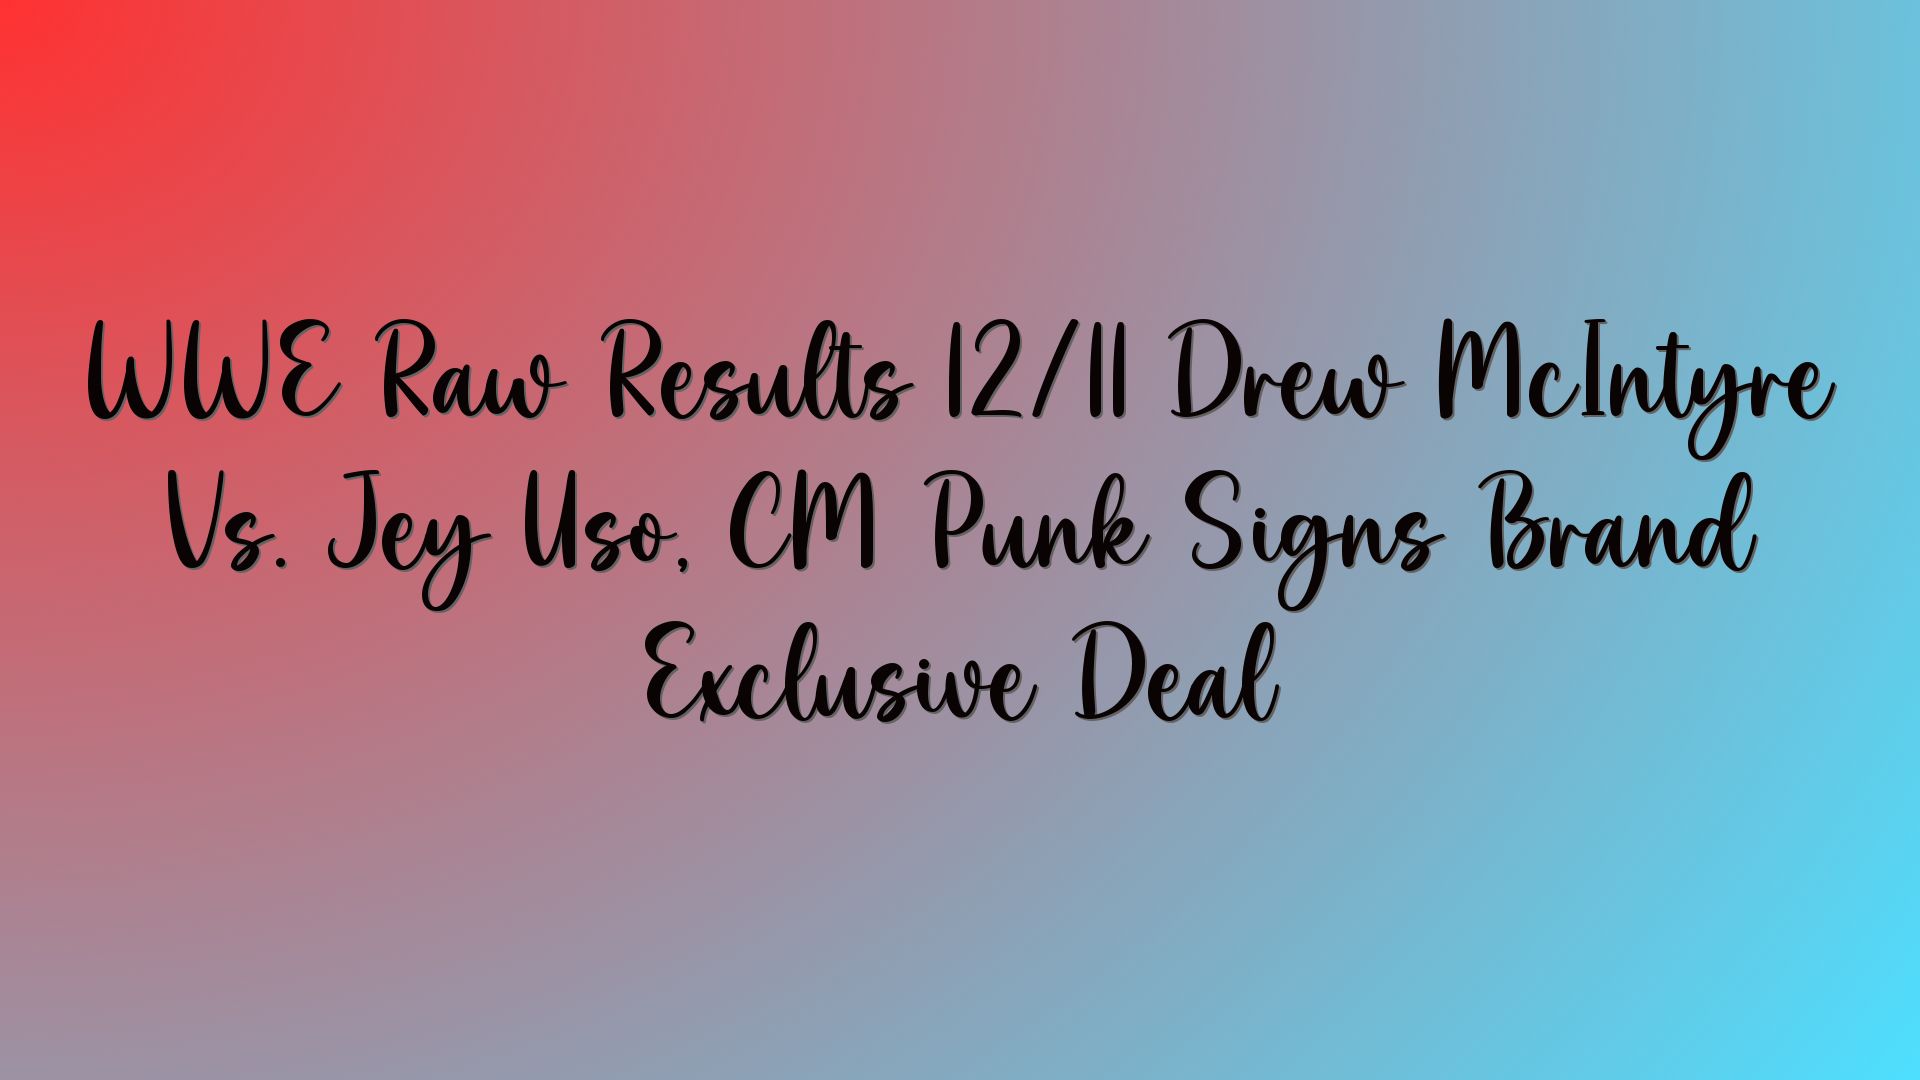 WWE Raw Results 12/11 Drew McIntyre Vs. Jey Uso, CM Punk Signs Brand Exclusive Deal